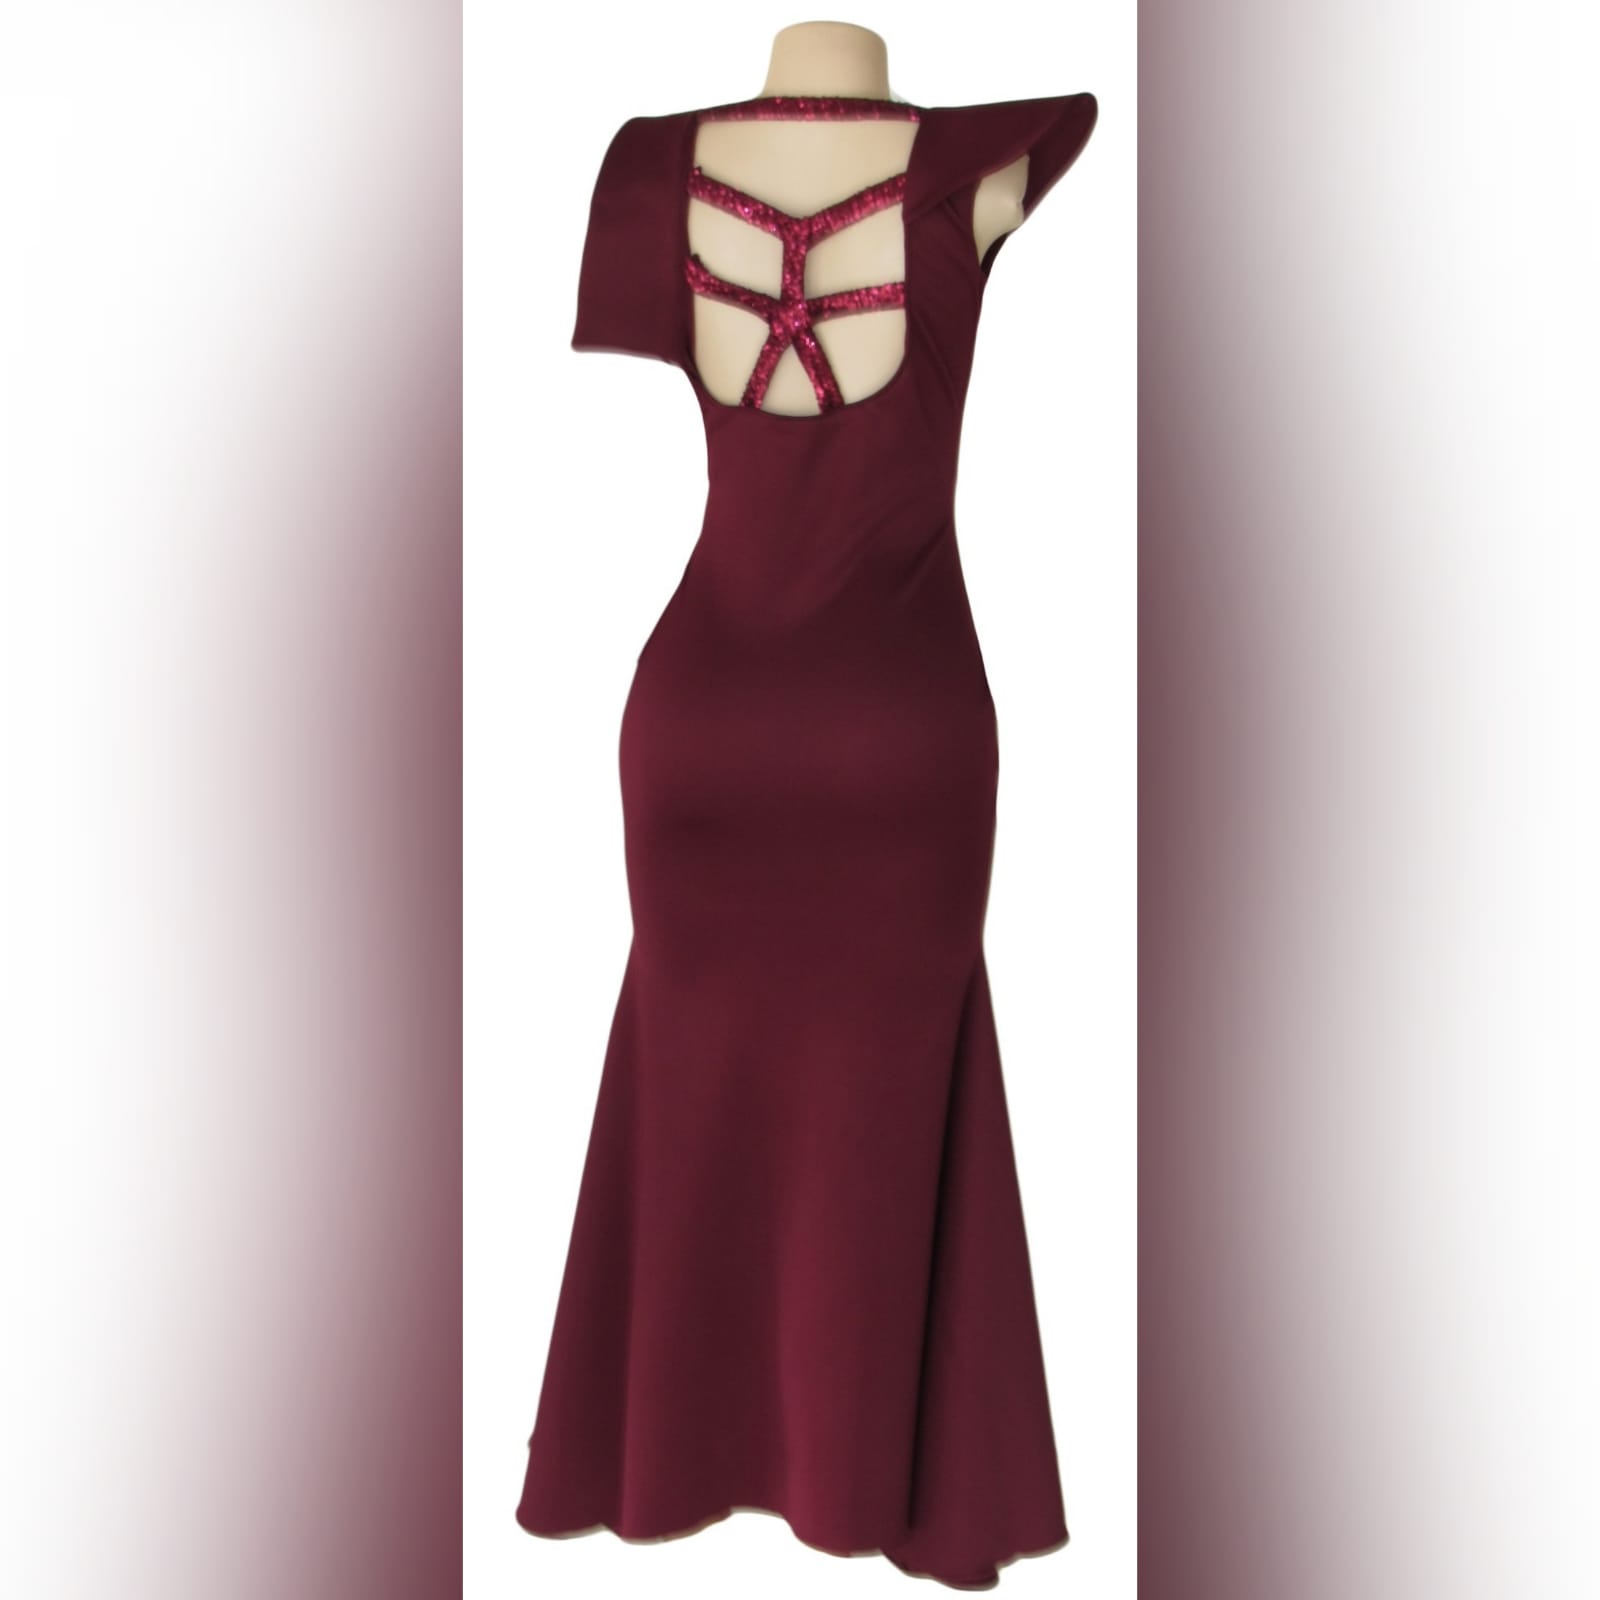 Burgundy tight fitting bridesmaid dress 4 burgundy tight fitting bridesmaid dress with an angled v neckline design. An open back detailed with sequins straps